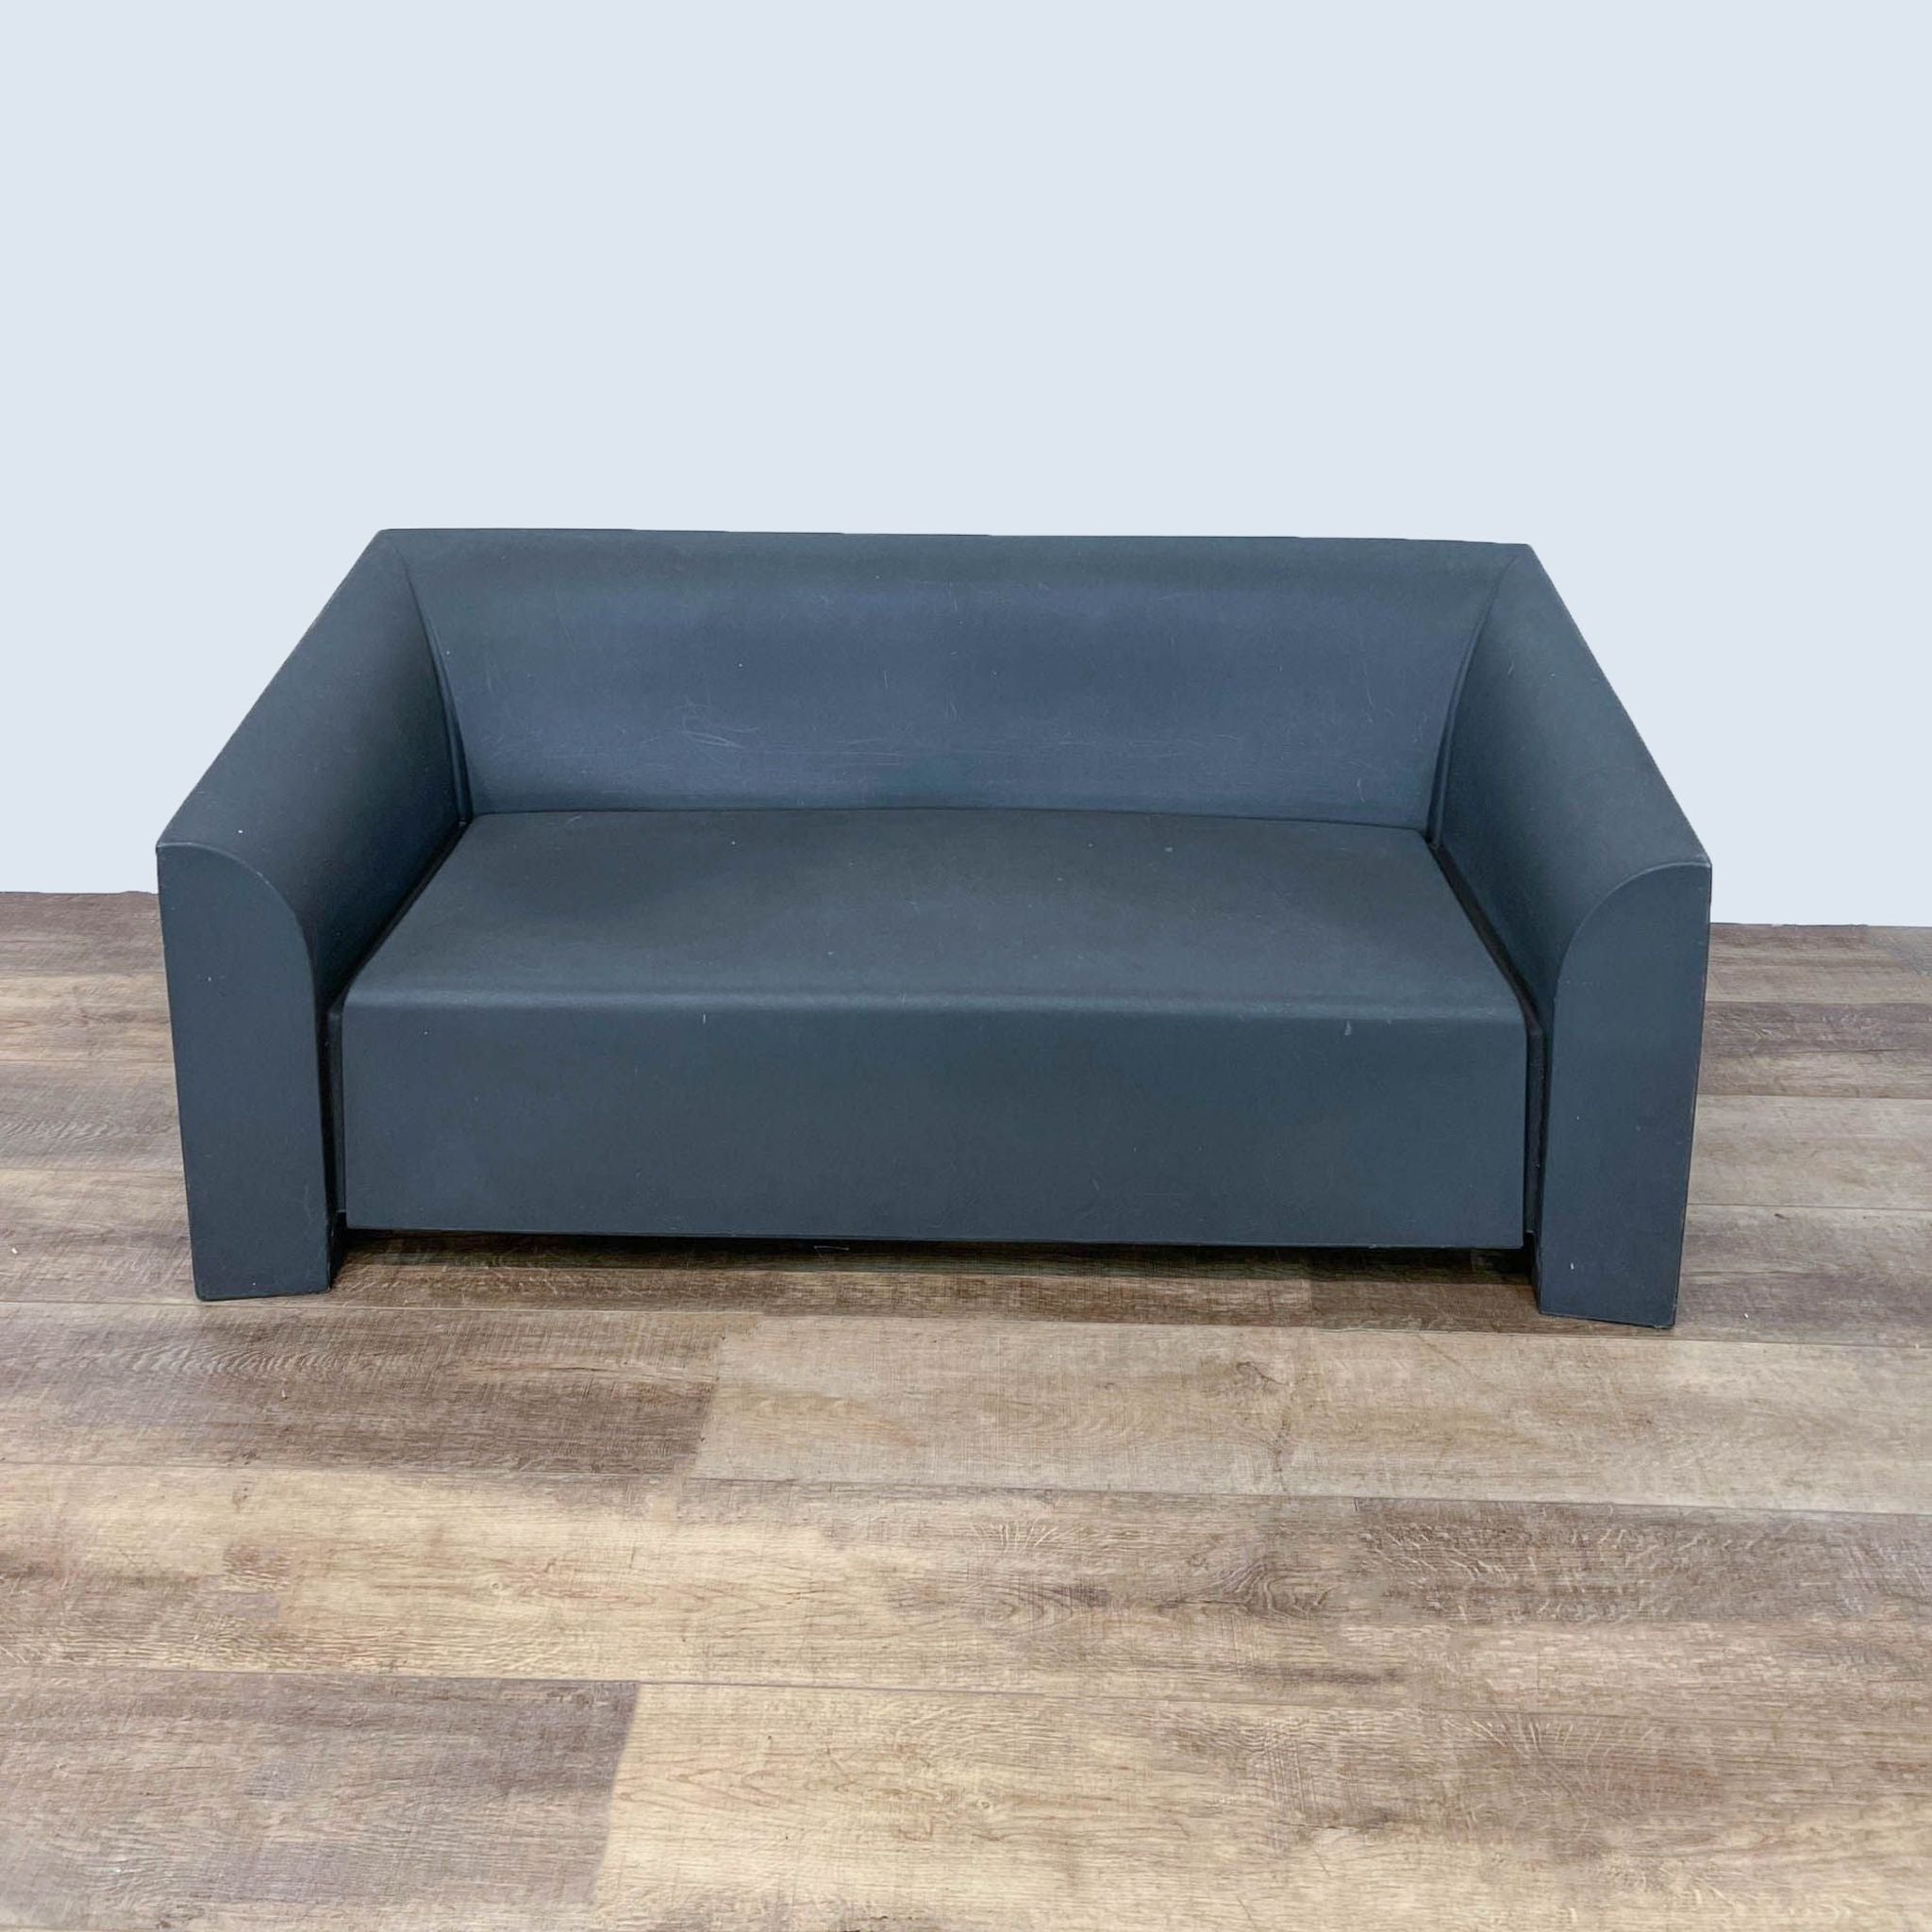 Dark gray Heller MB2 compact outdoor sofa with weather-resistant polyethylene design, by 2modern.